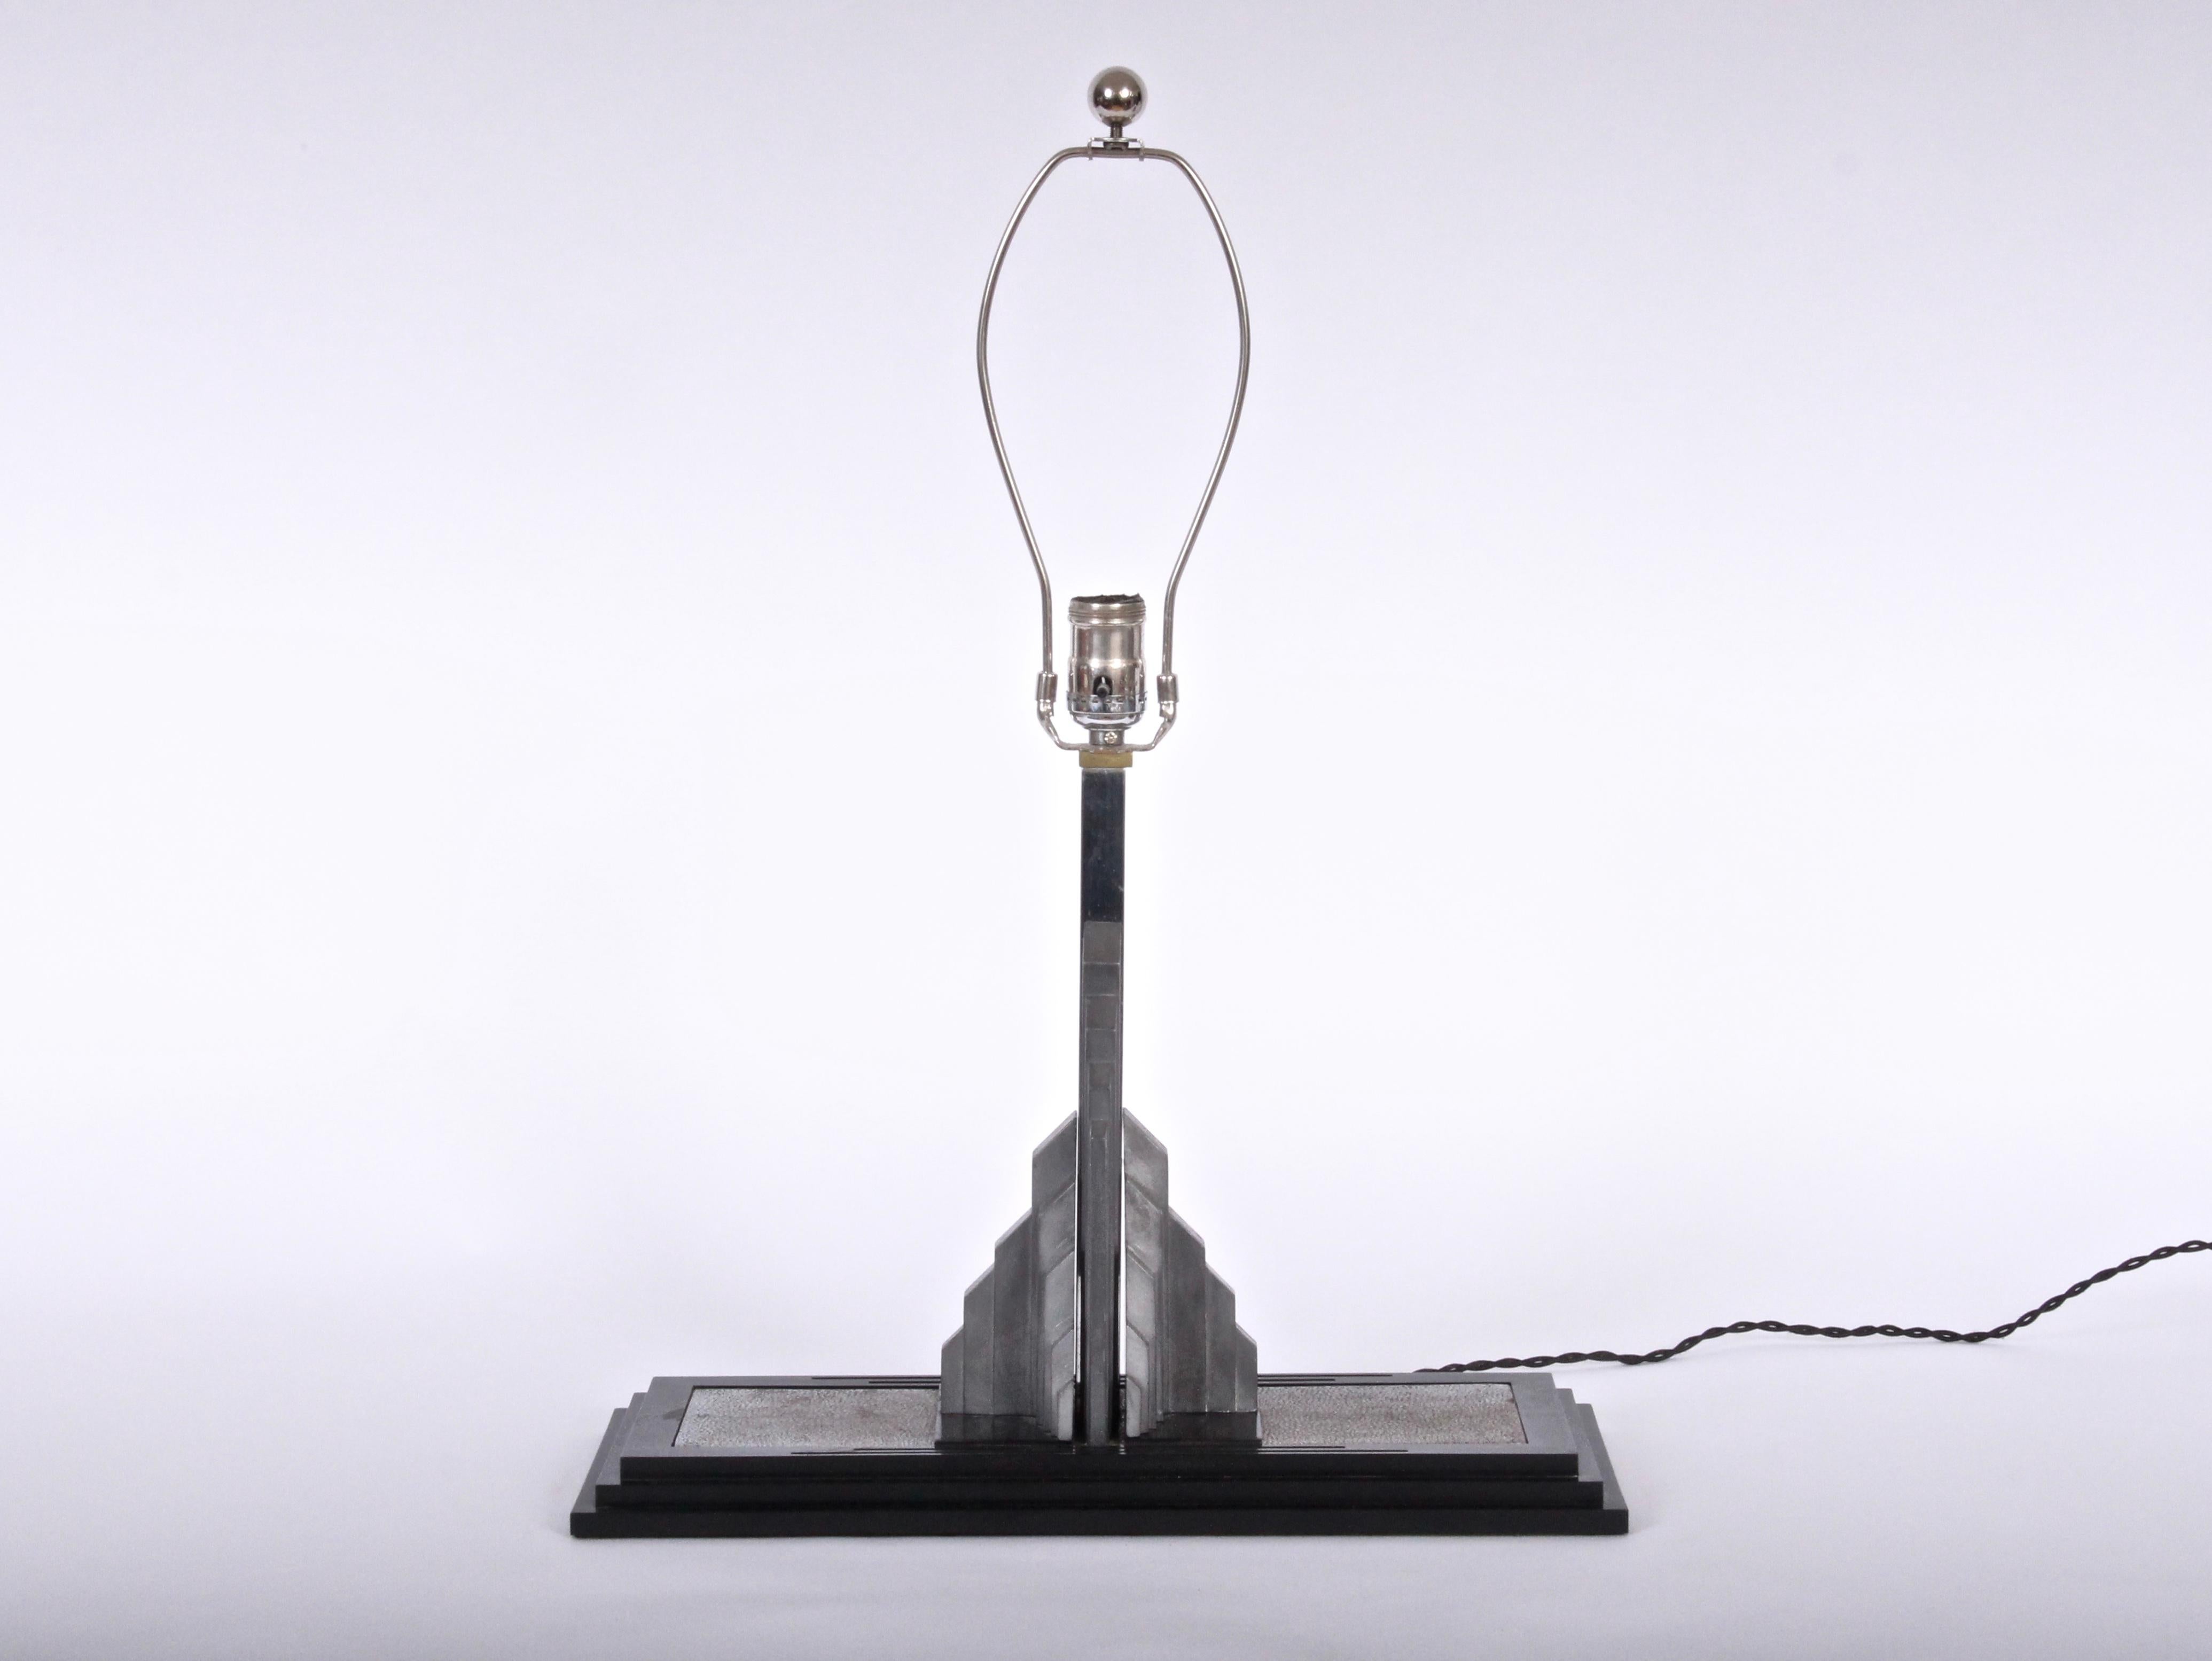 Art Deco Lib-O-Lite Skyscraper Combination Bookend Table Lamp in Cast Aluminum, Nickel-Plate and Black Bakelite for Manufacturers Finishing Company. Spring loaded Aluminum Skyscraper form, rectangular Bakelite step base with Nickel-Plated Brass